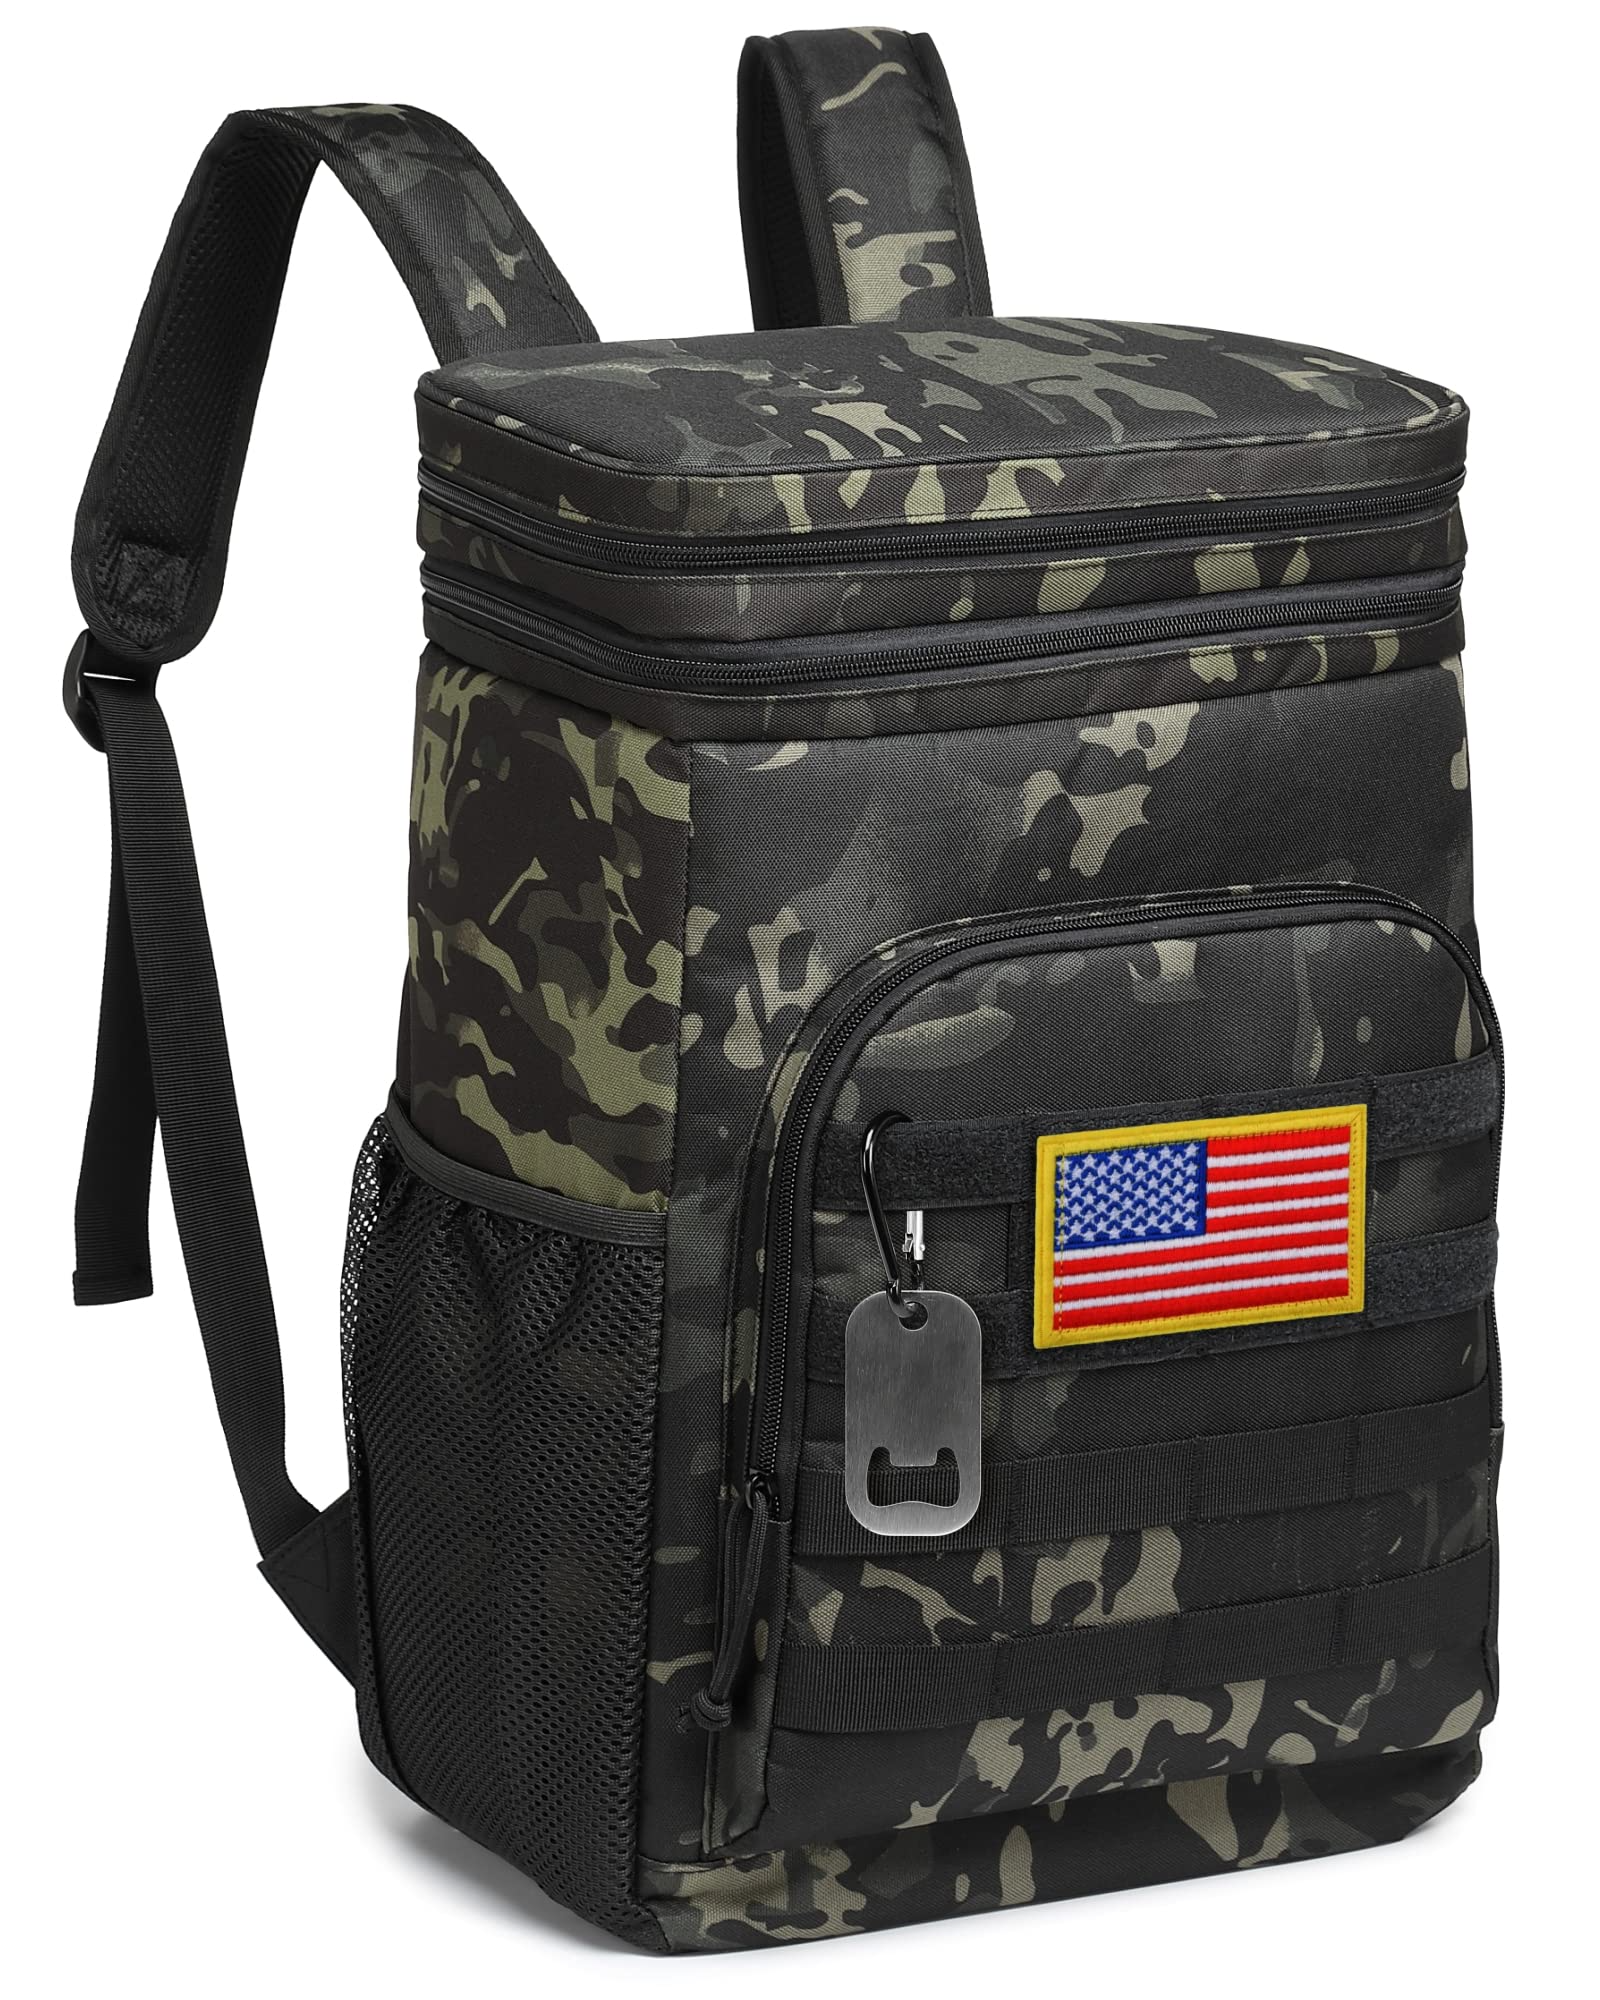 Camo tactical backpack